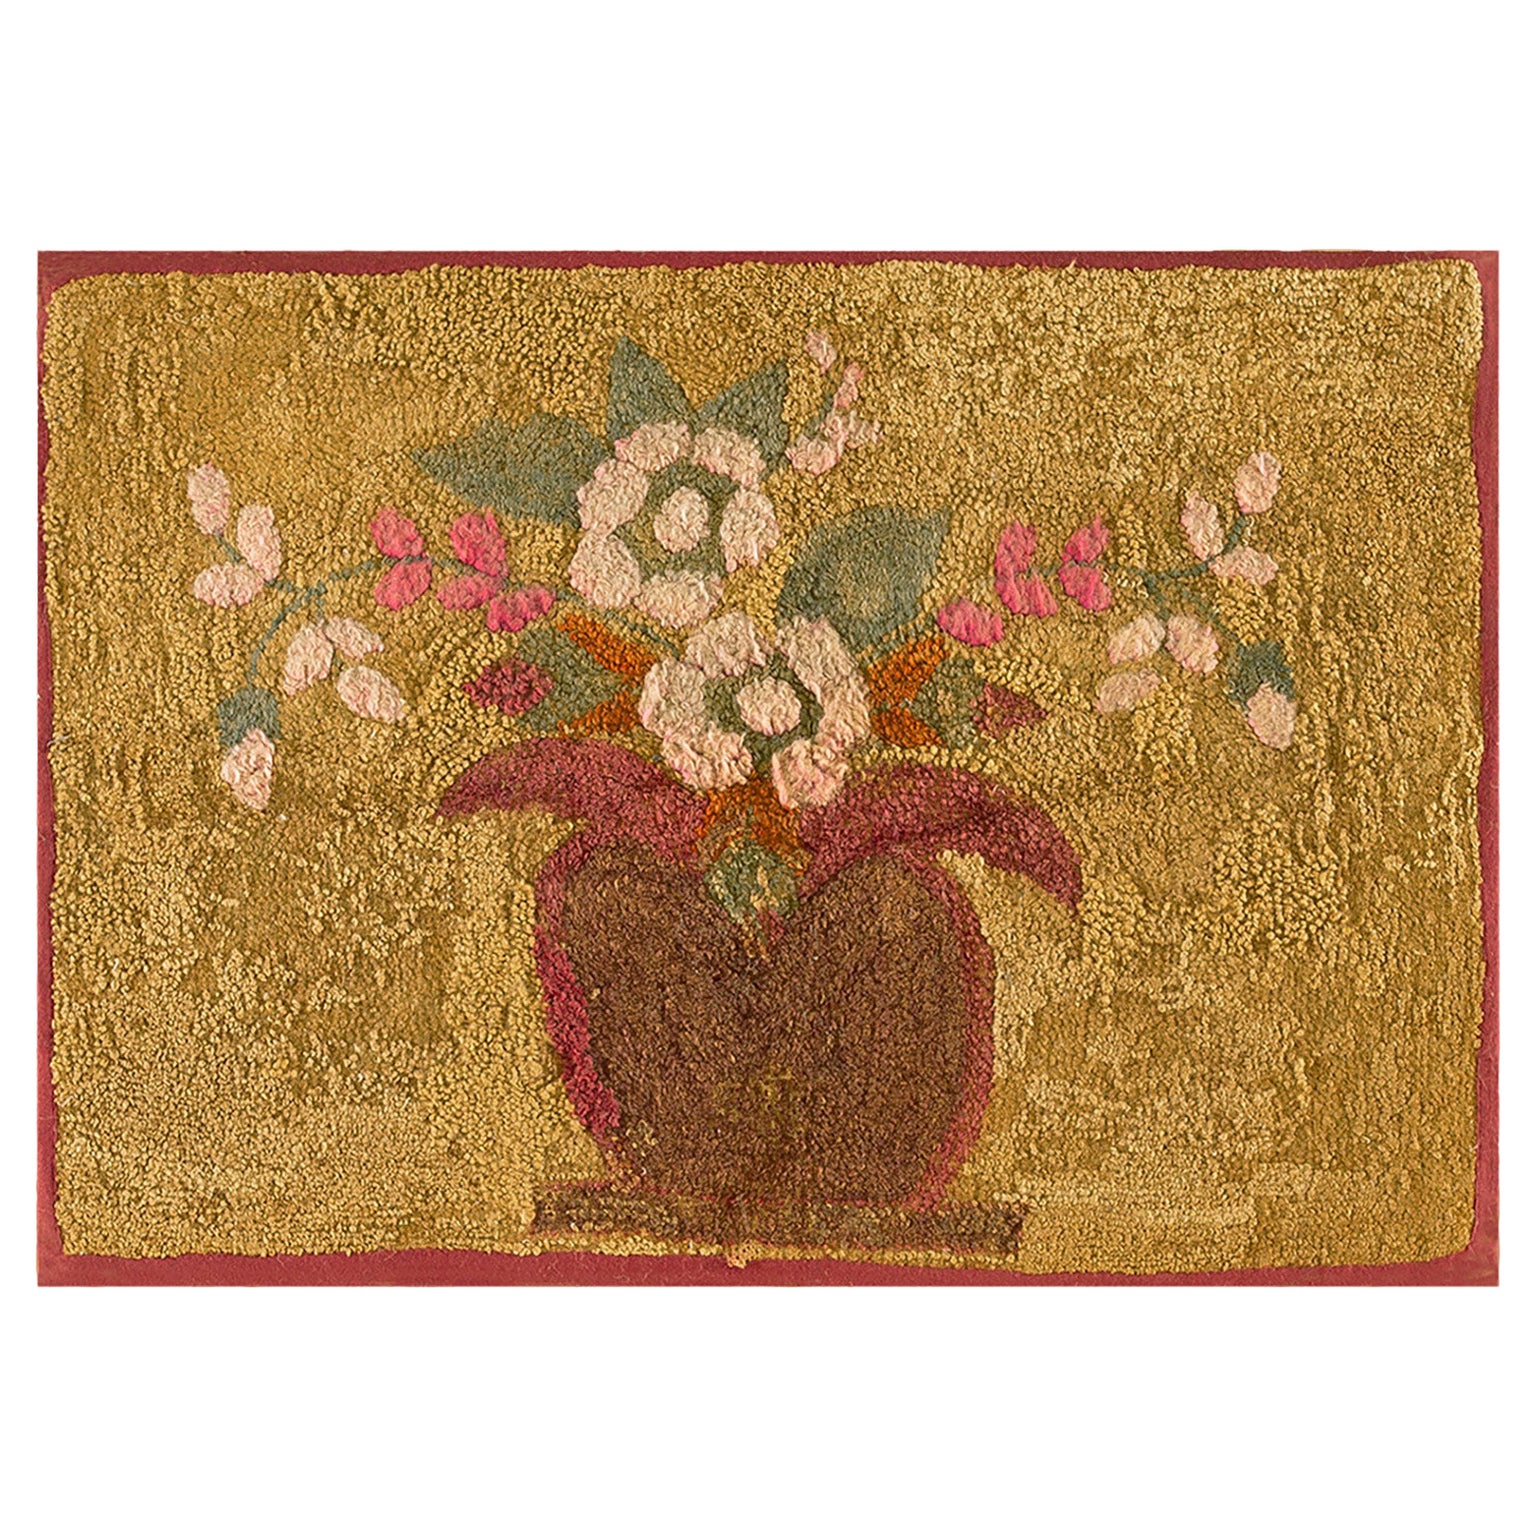 Early 20th Century American Hooked Rug ( 2'3" x 3'1" - 69 x 94 ) For Sale